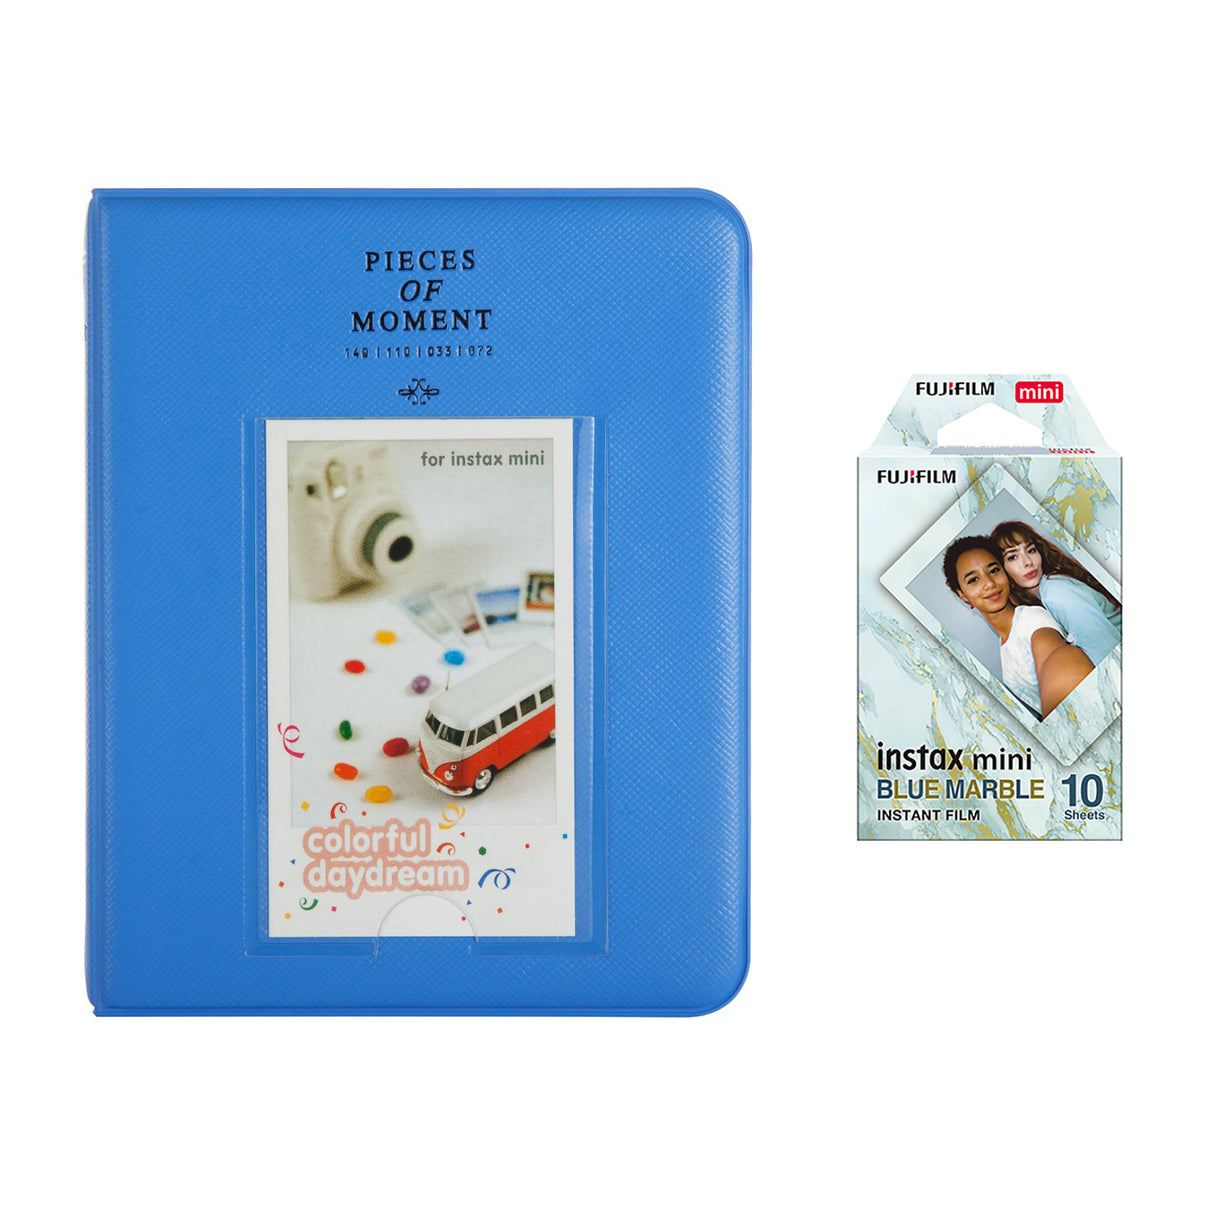 Fujifilm Instax Mini 10X1 blue marble Instant Film with Instax Time Photo Album 64 Sheets Cobalt blue